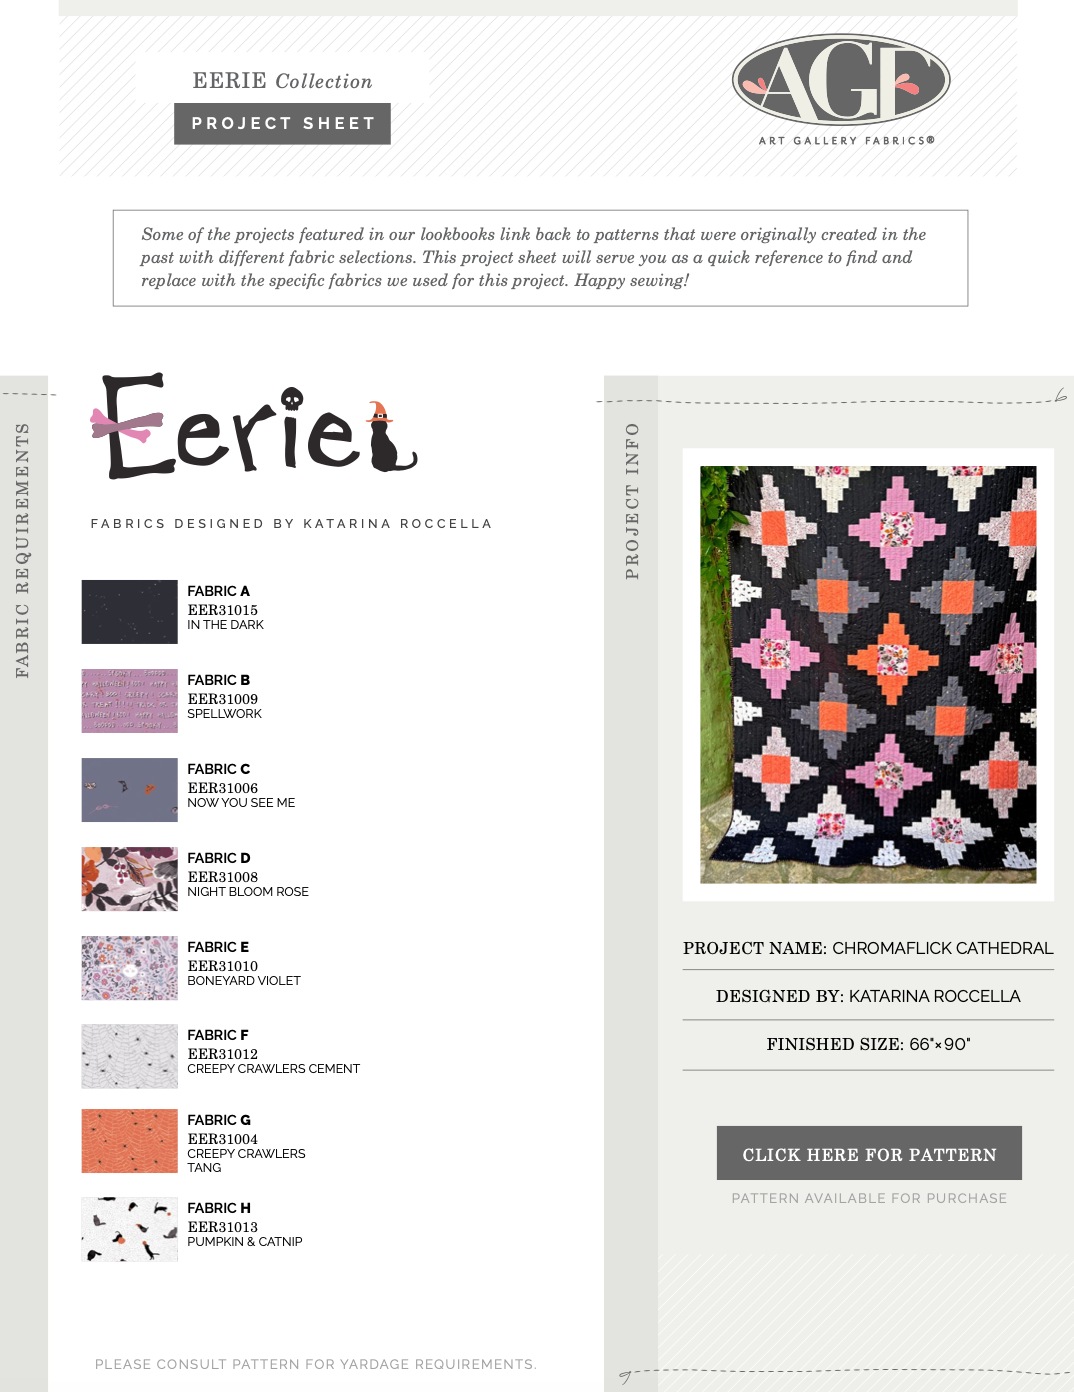 Eerie by Katarina Roccella : Chromaflick Cathedral Quilt Kit